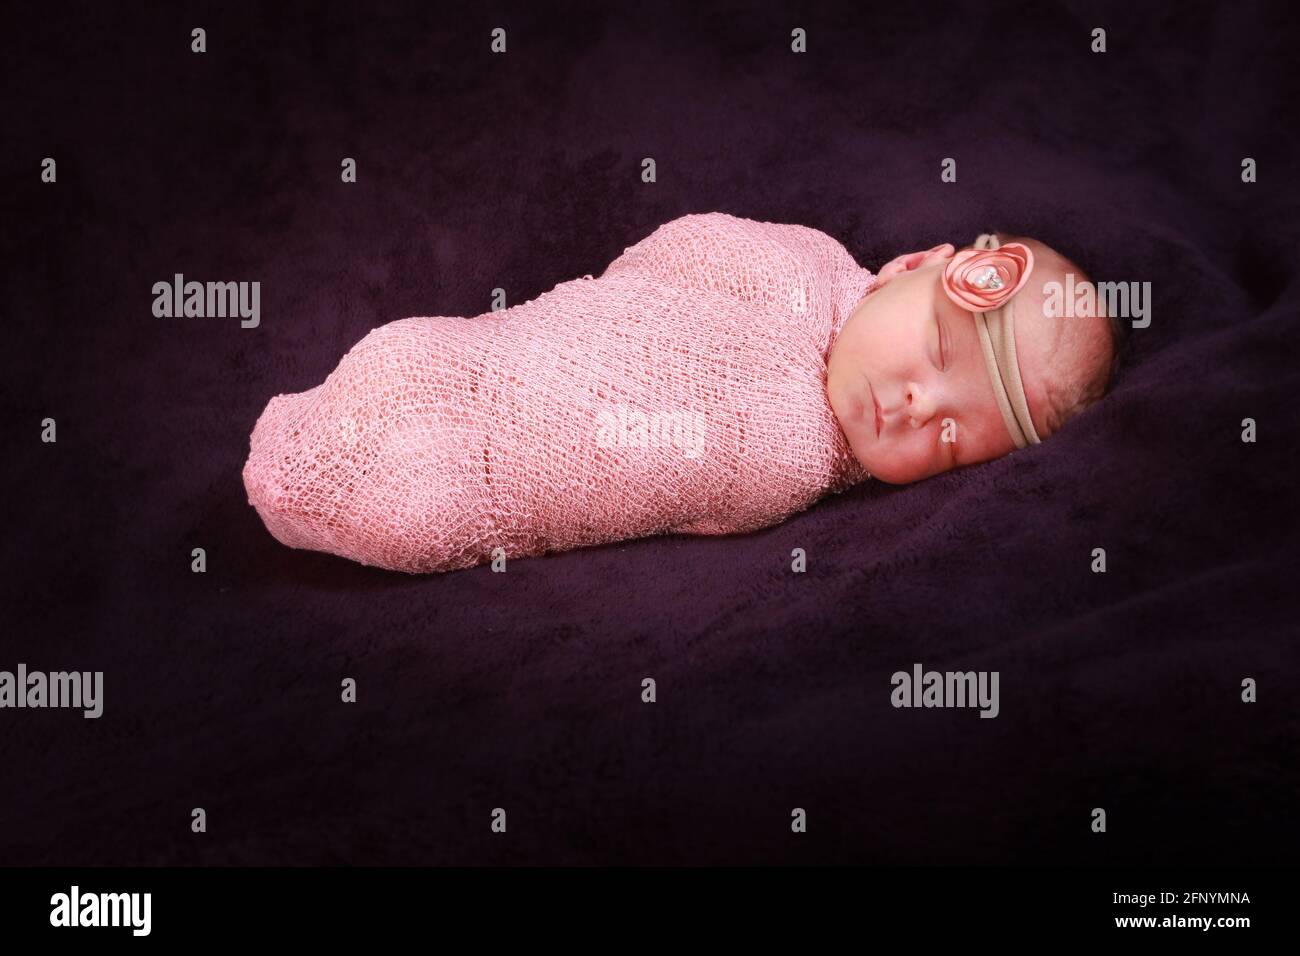 baby girl sleeping in a blanket, 10 day old baby girl Stock Photo